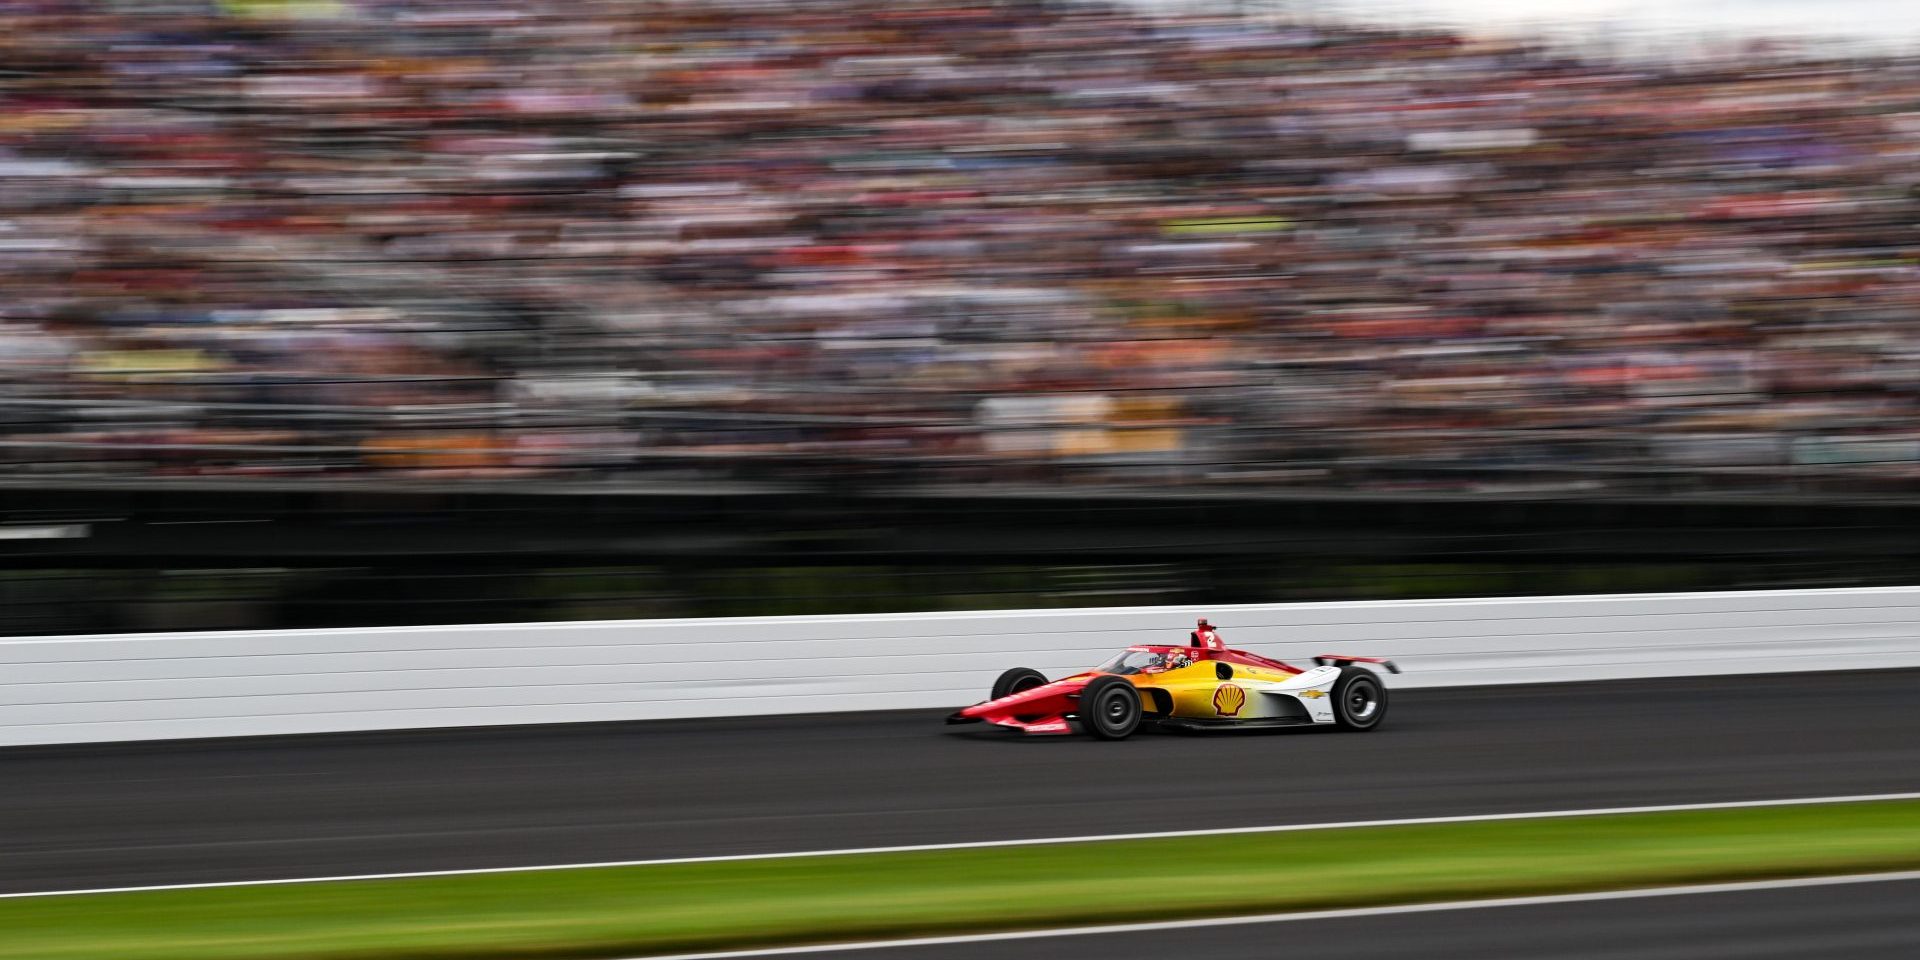 Are Indy Cars Identical?